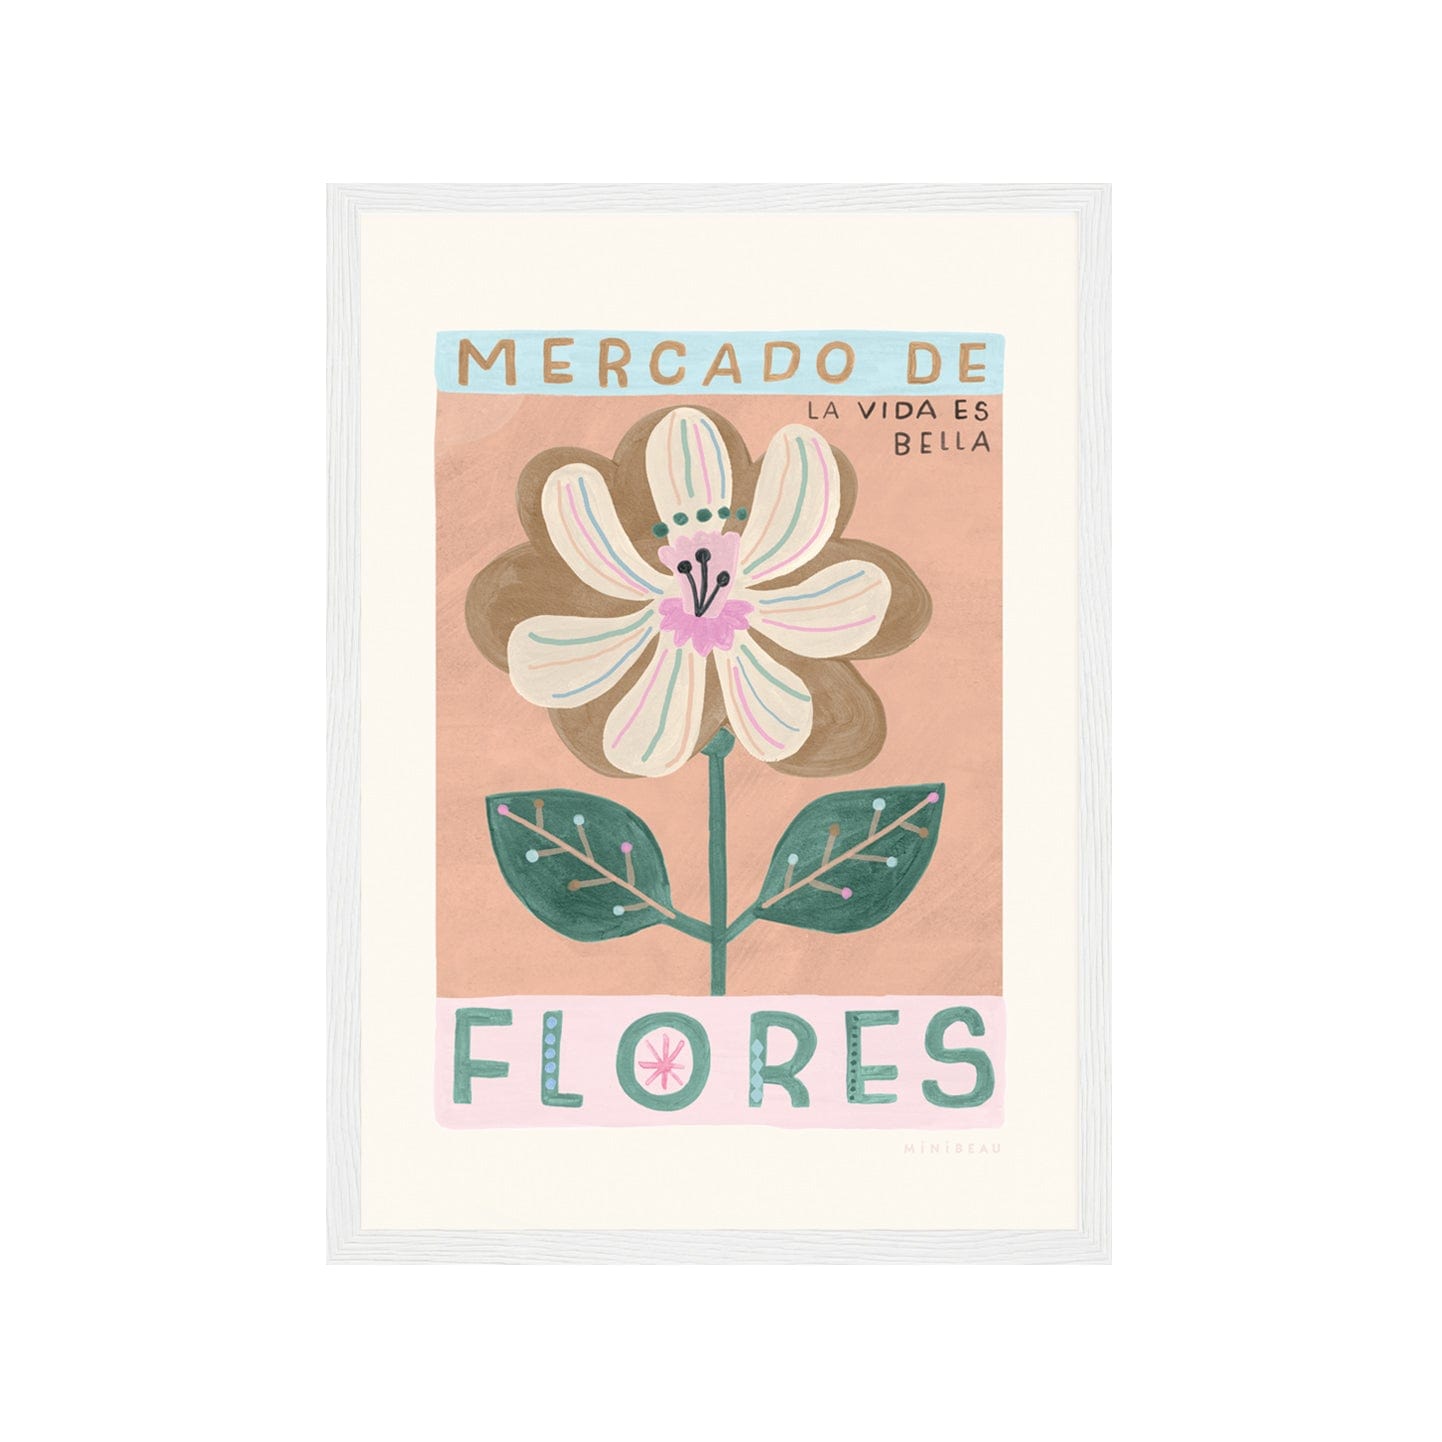 Art print in white frame. Our Mercado de Flores art print drawn in a vintage style features alarge cream flower with pink and blue veins and 2 leaves on the stem on a pink background. With MERCADO DE on a blue background, and  FLORES on a cream background, in large font and LA VIDA ES BELLA in small text on a terracotta and cream background.